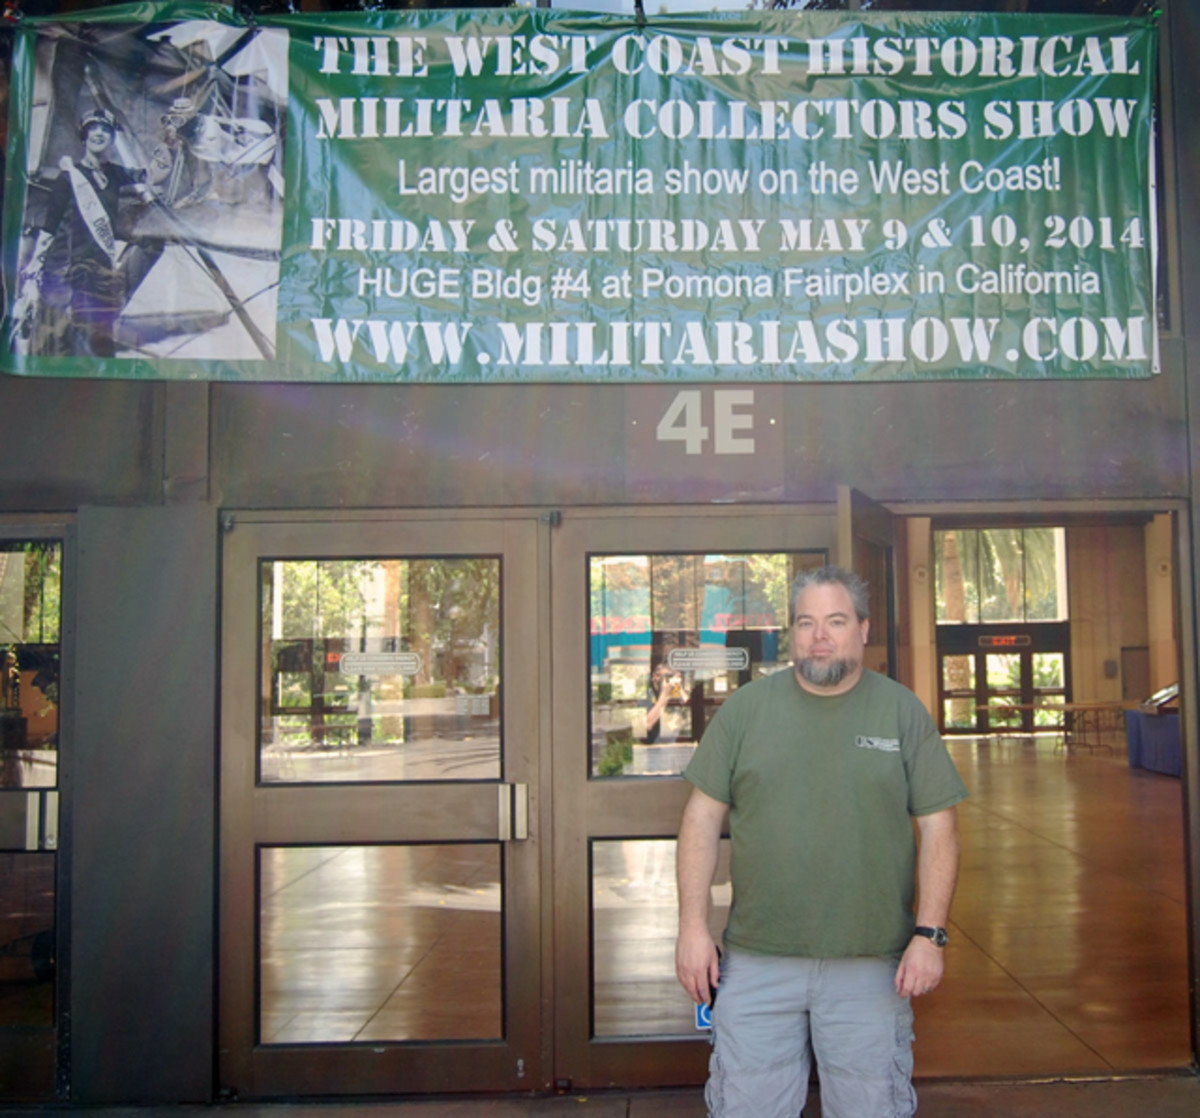 Bob Chatt of Vintage Productions and show organizer greets all to the West Coast Historical Militaria Collectors Show.